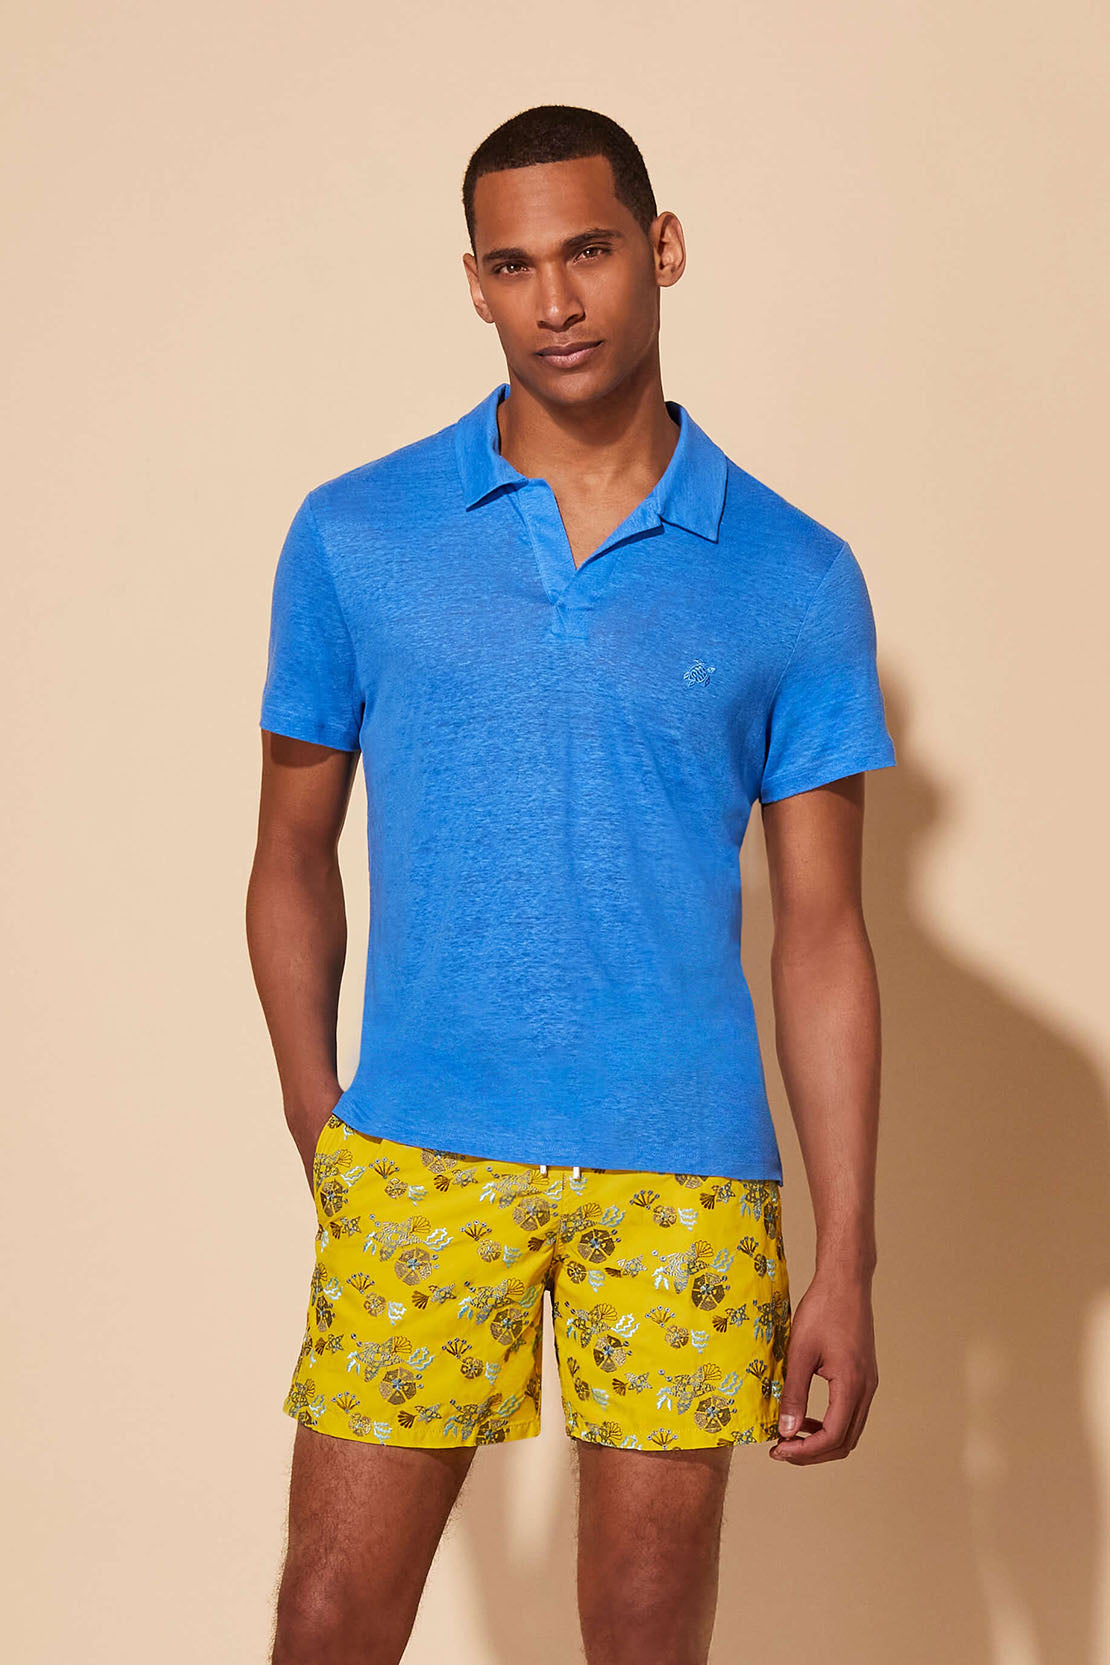 VILEBREQUIN - PYRAMID Linen Jersey Polo Shirt in Bright Blue PYRE9O00-367